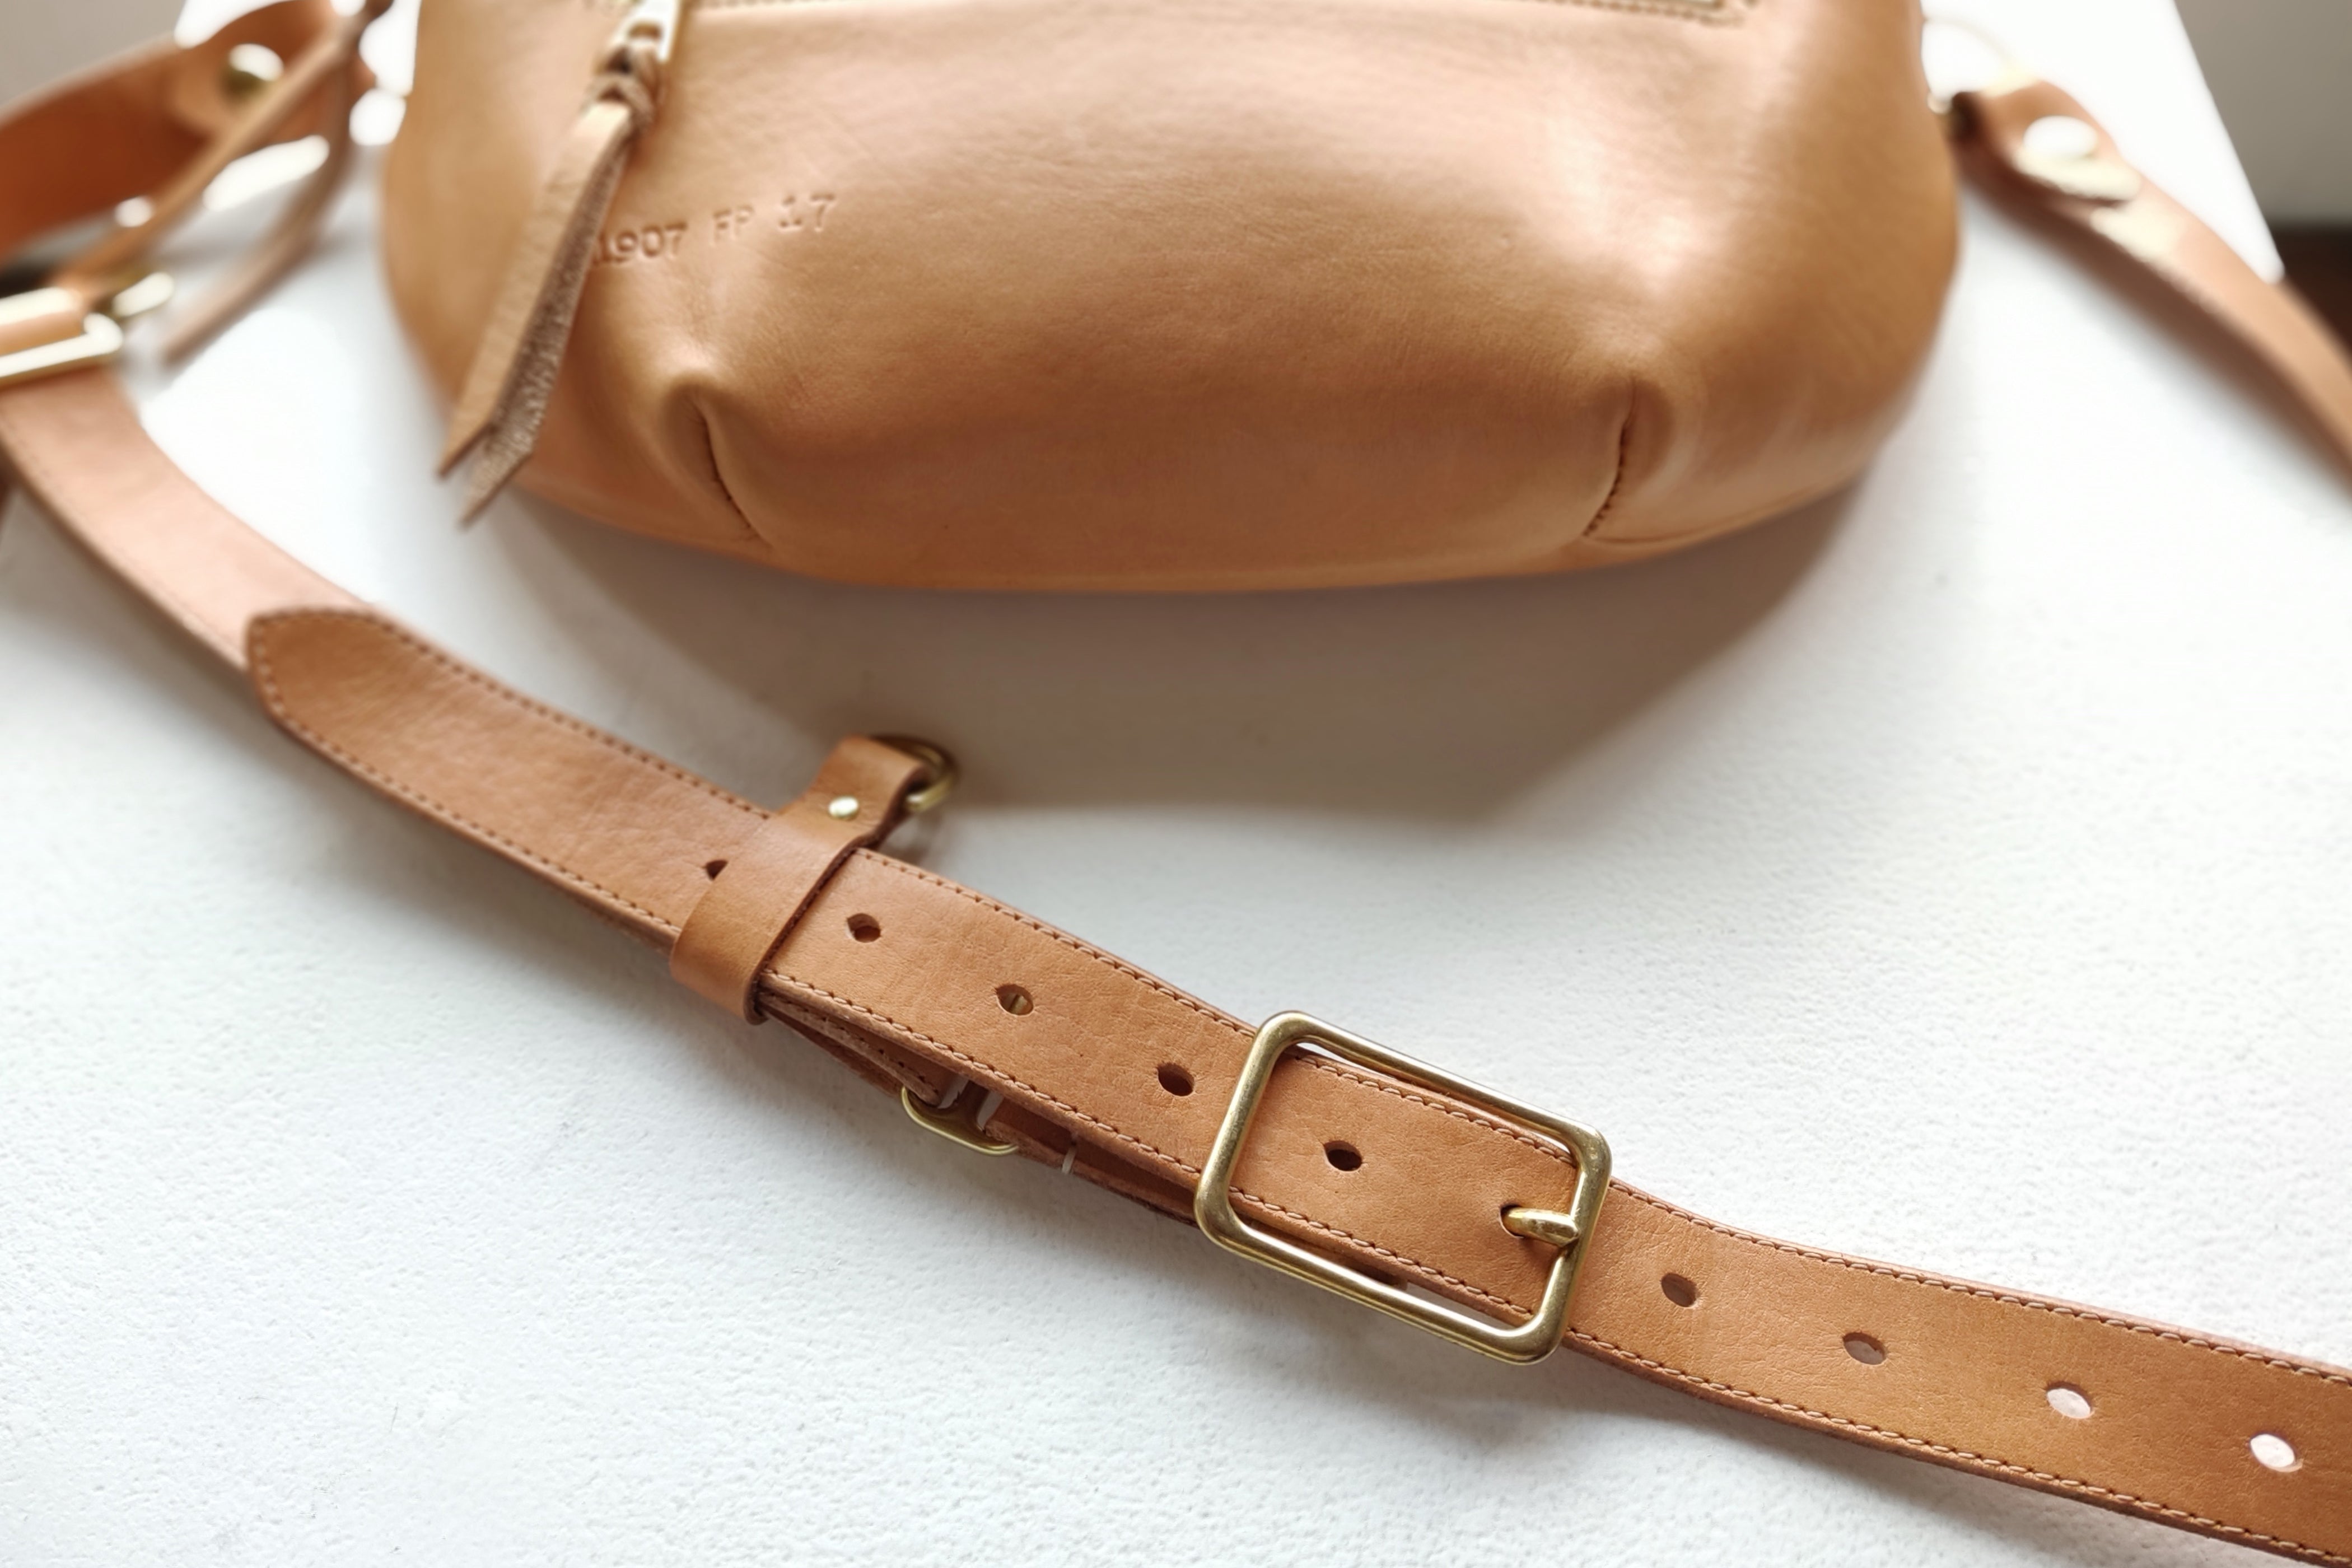 1907 All-Leather FANNY PACK - July 23, 2021 Release